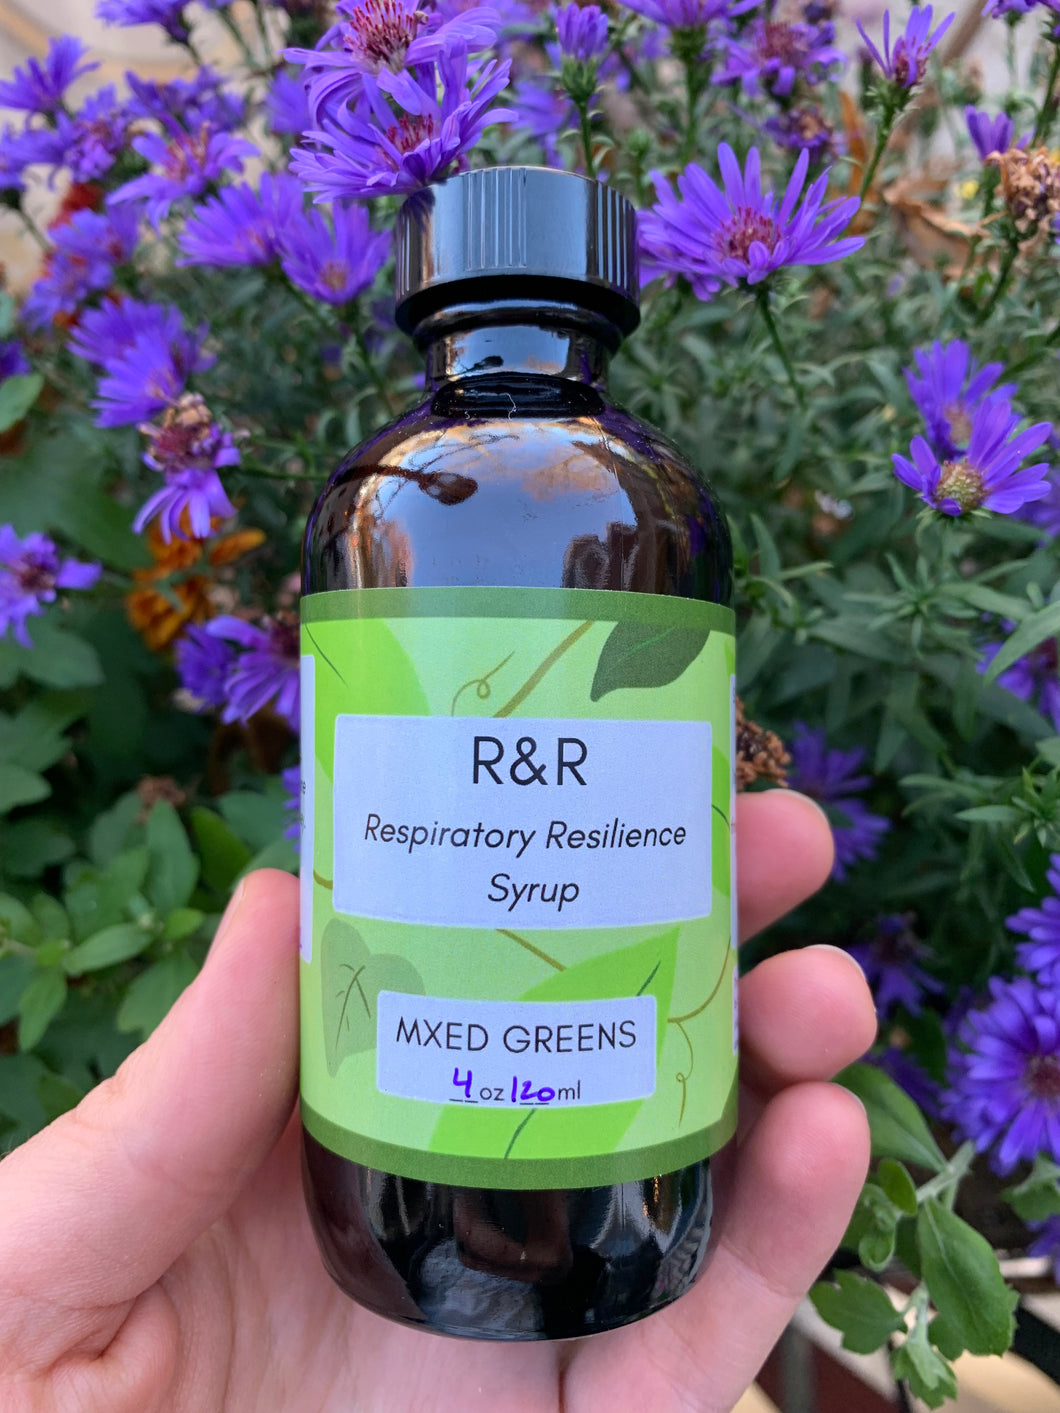 R&R Respiratory Resilience Syrup